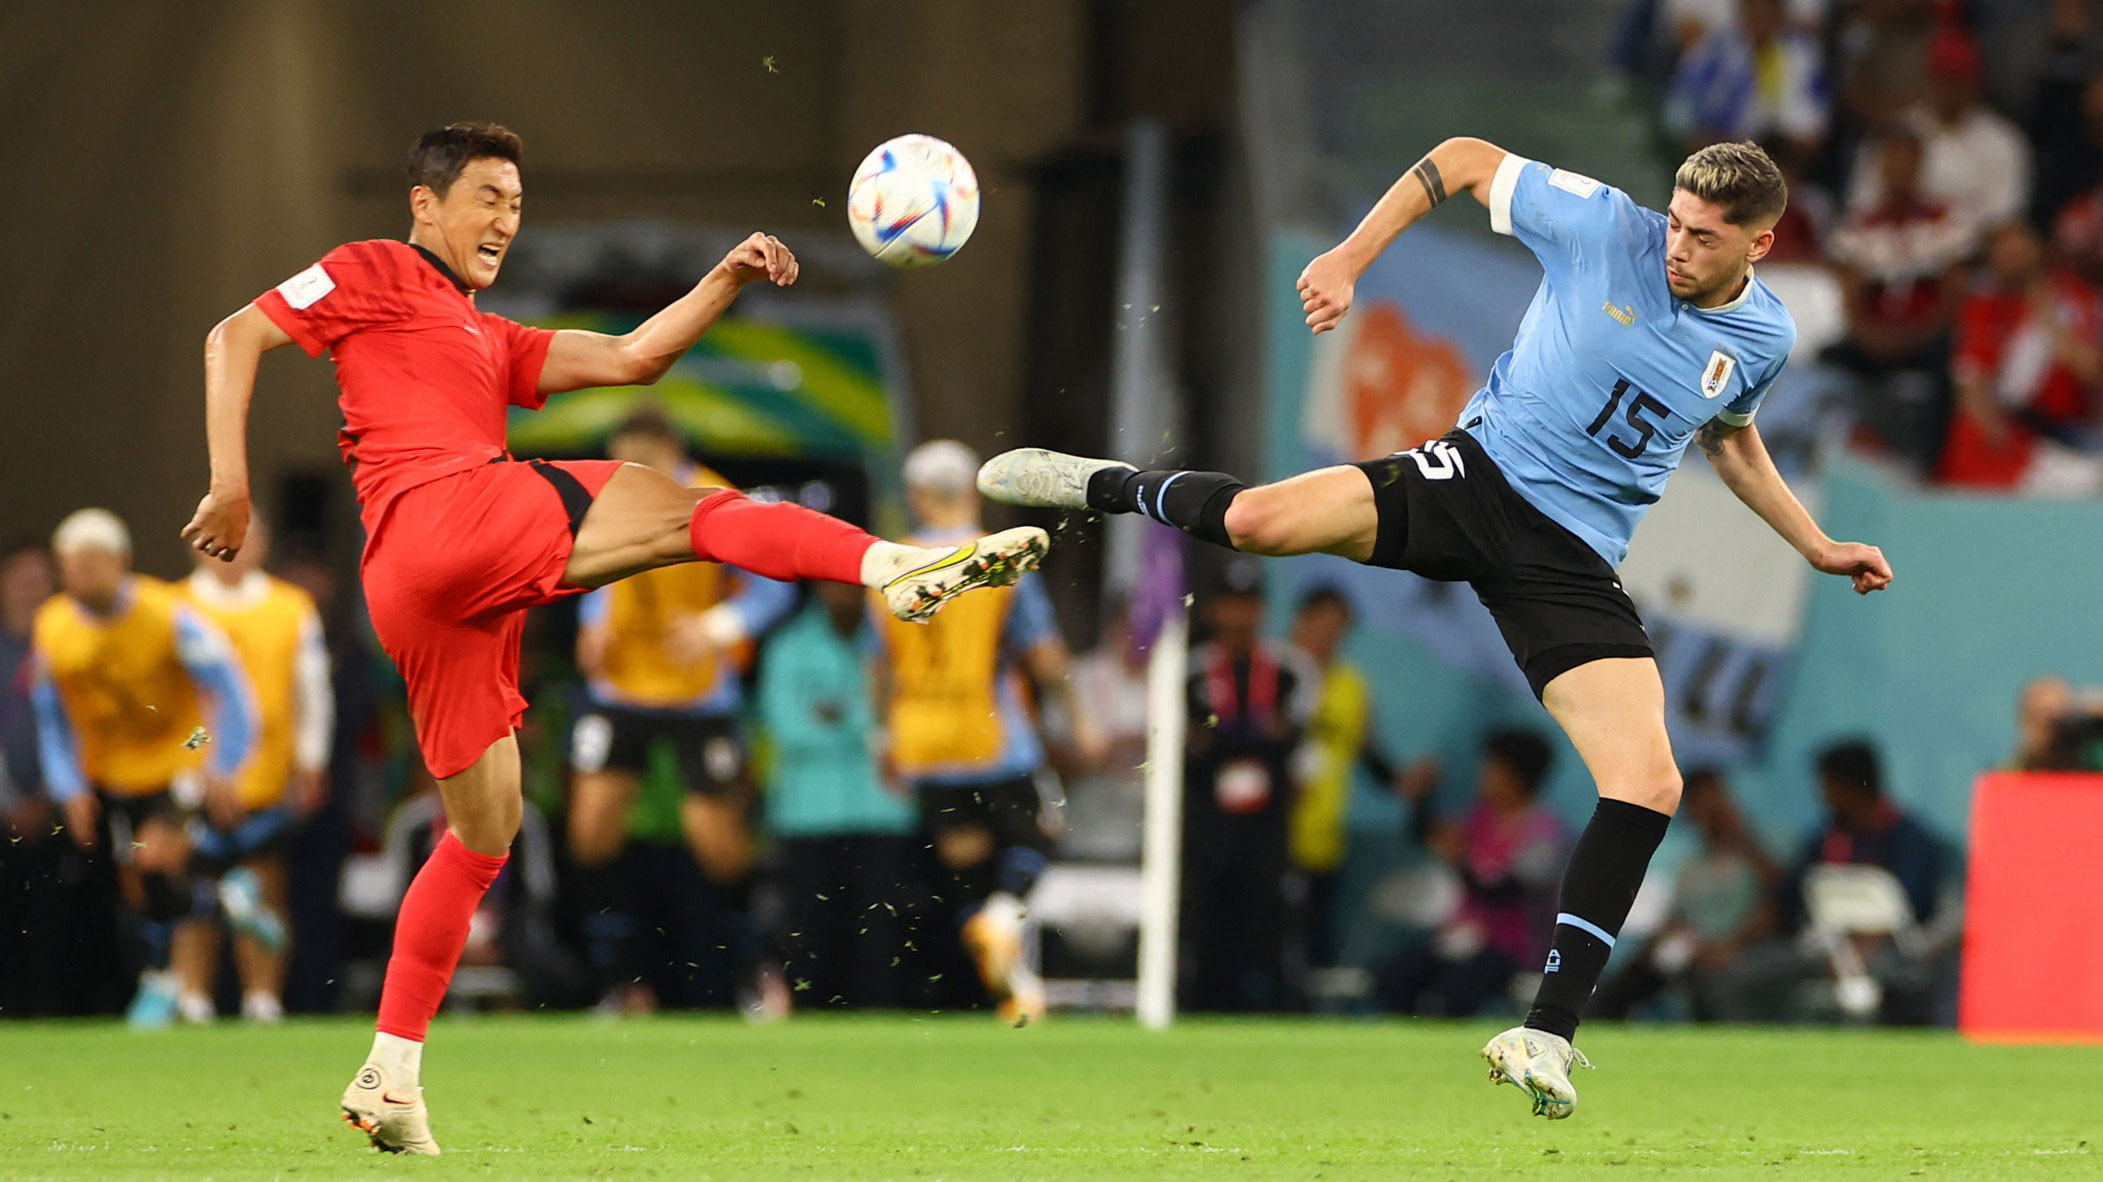 Uruguay were held to a 0-0 stalemate against South Korea in their opening World Cup match, despite both Diego Godin and Federico Valverde hitting the post.